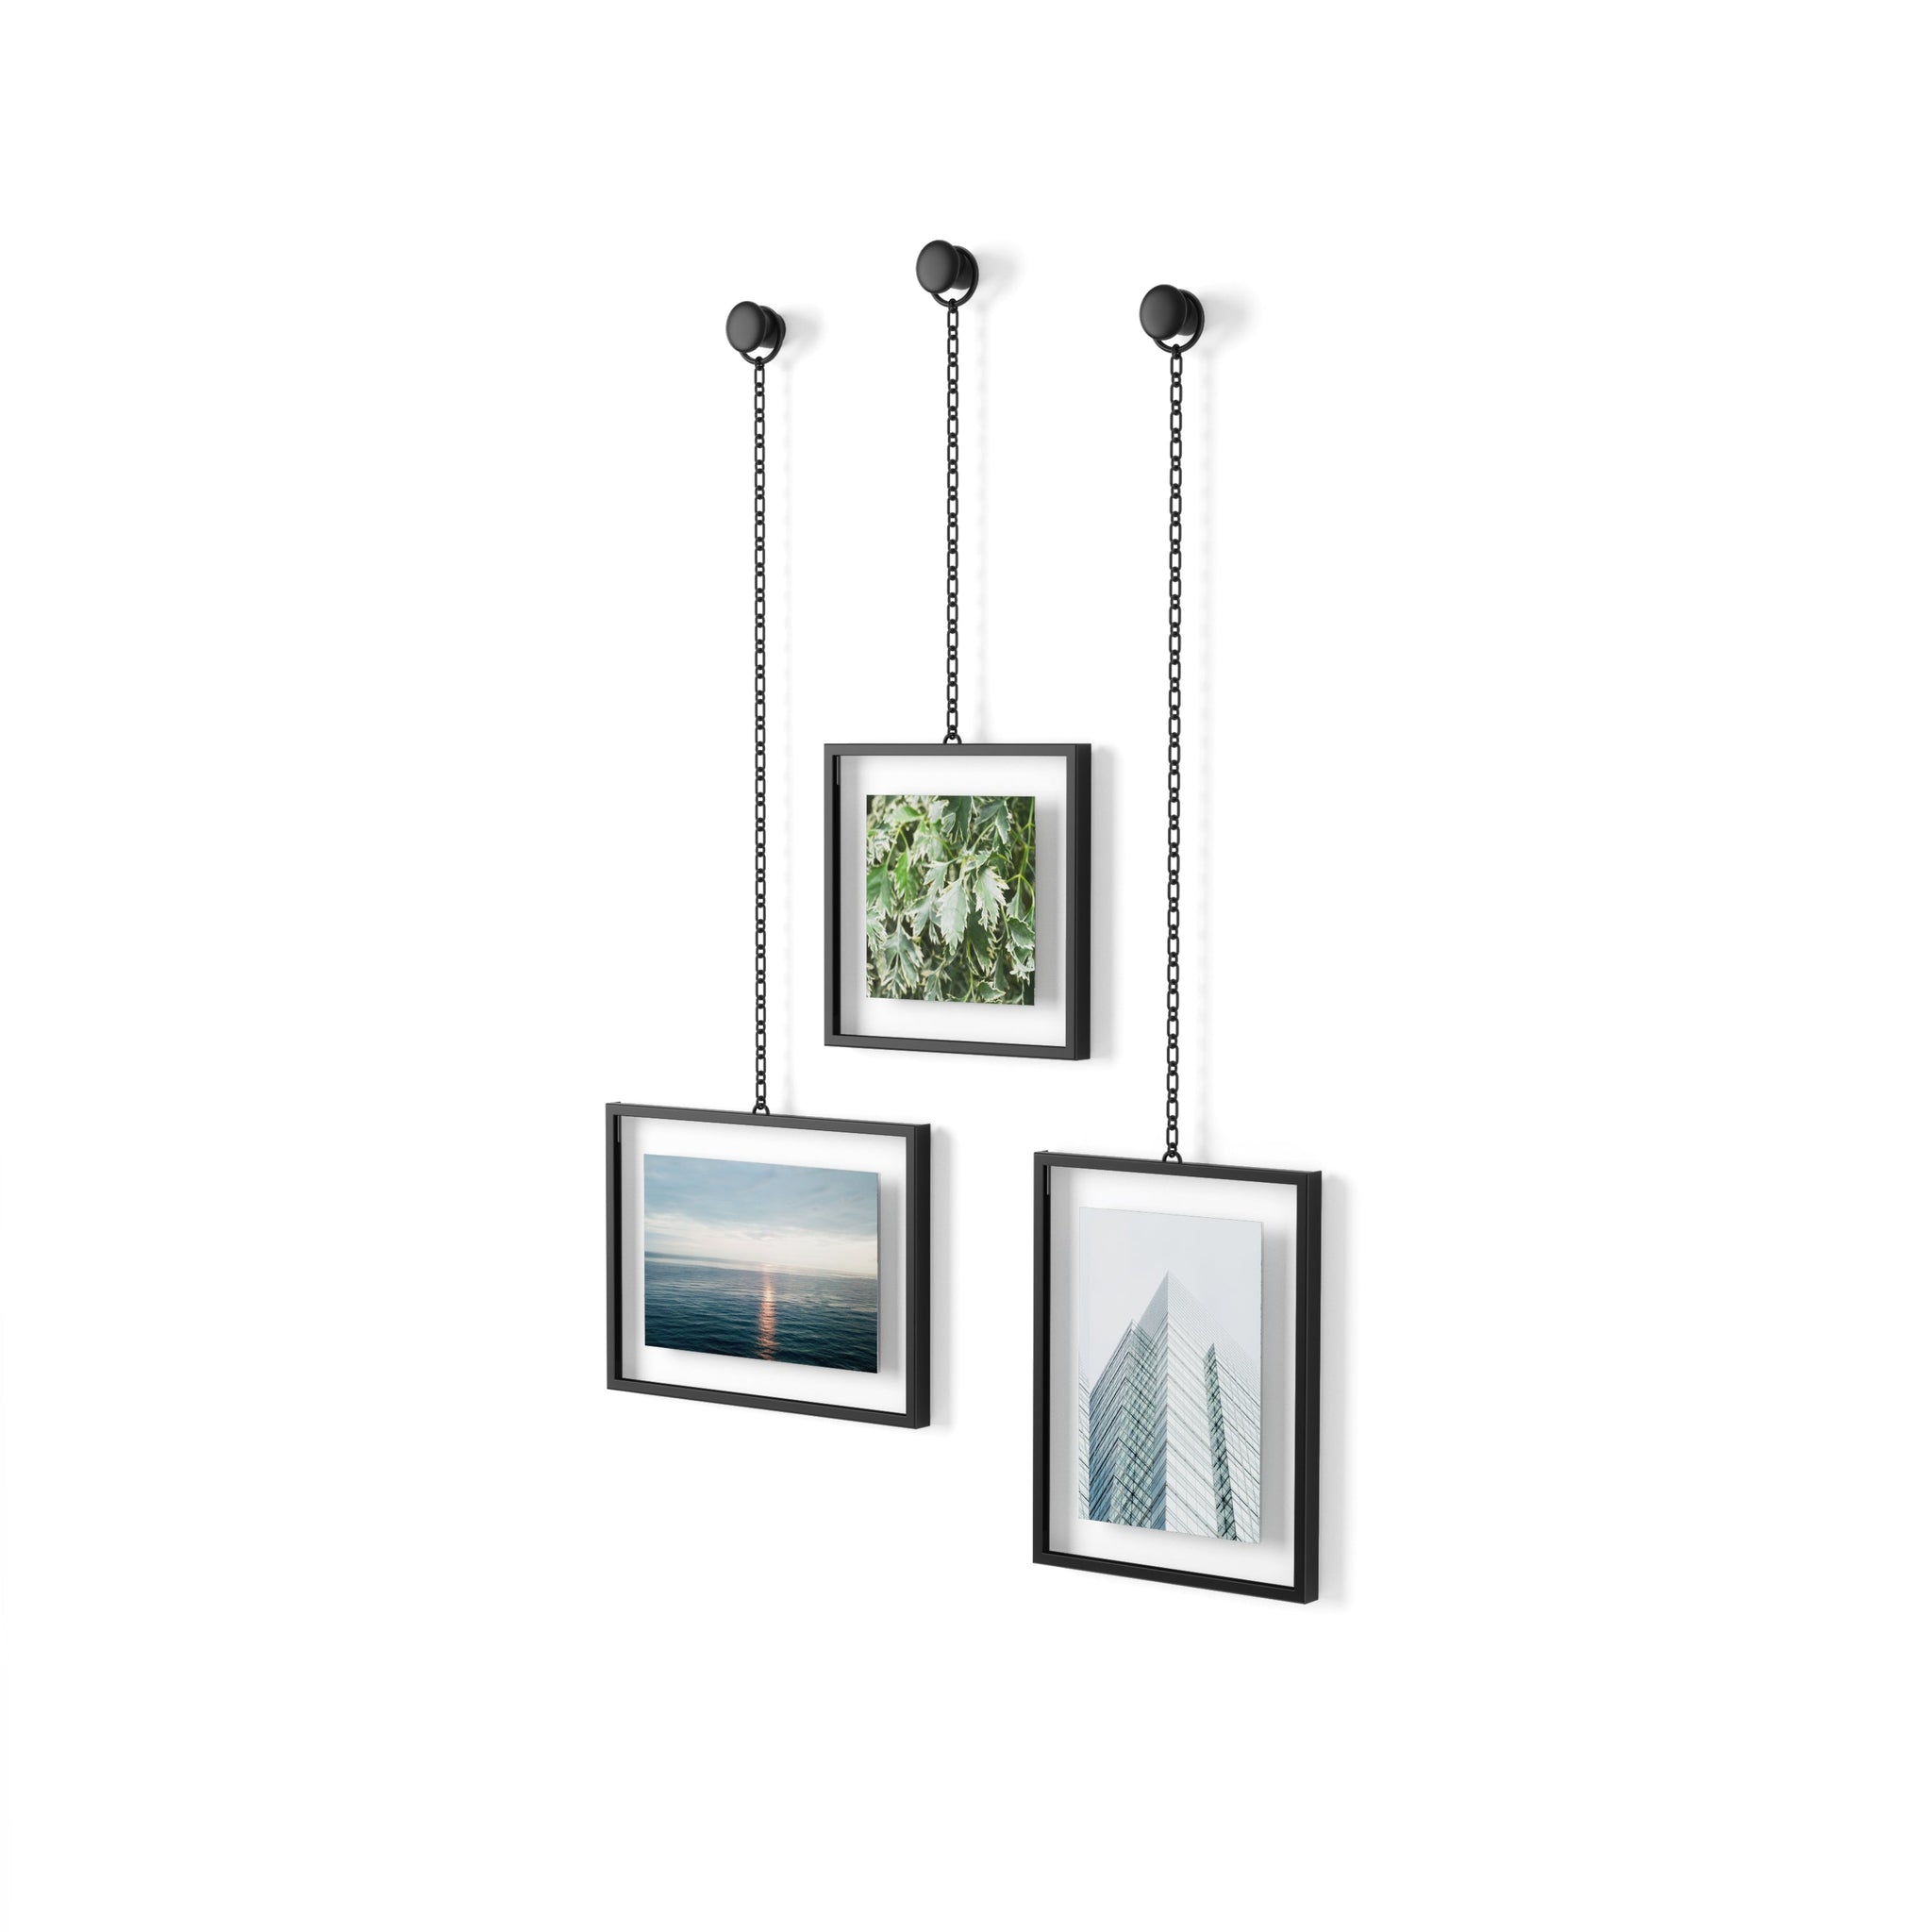 Umbra Fotochain 8x10 Gallery Picture Frame, Set of Three